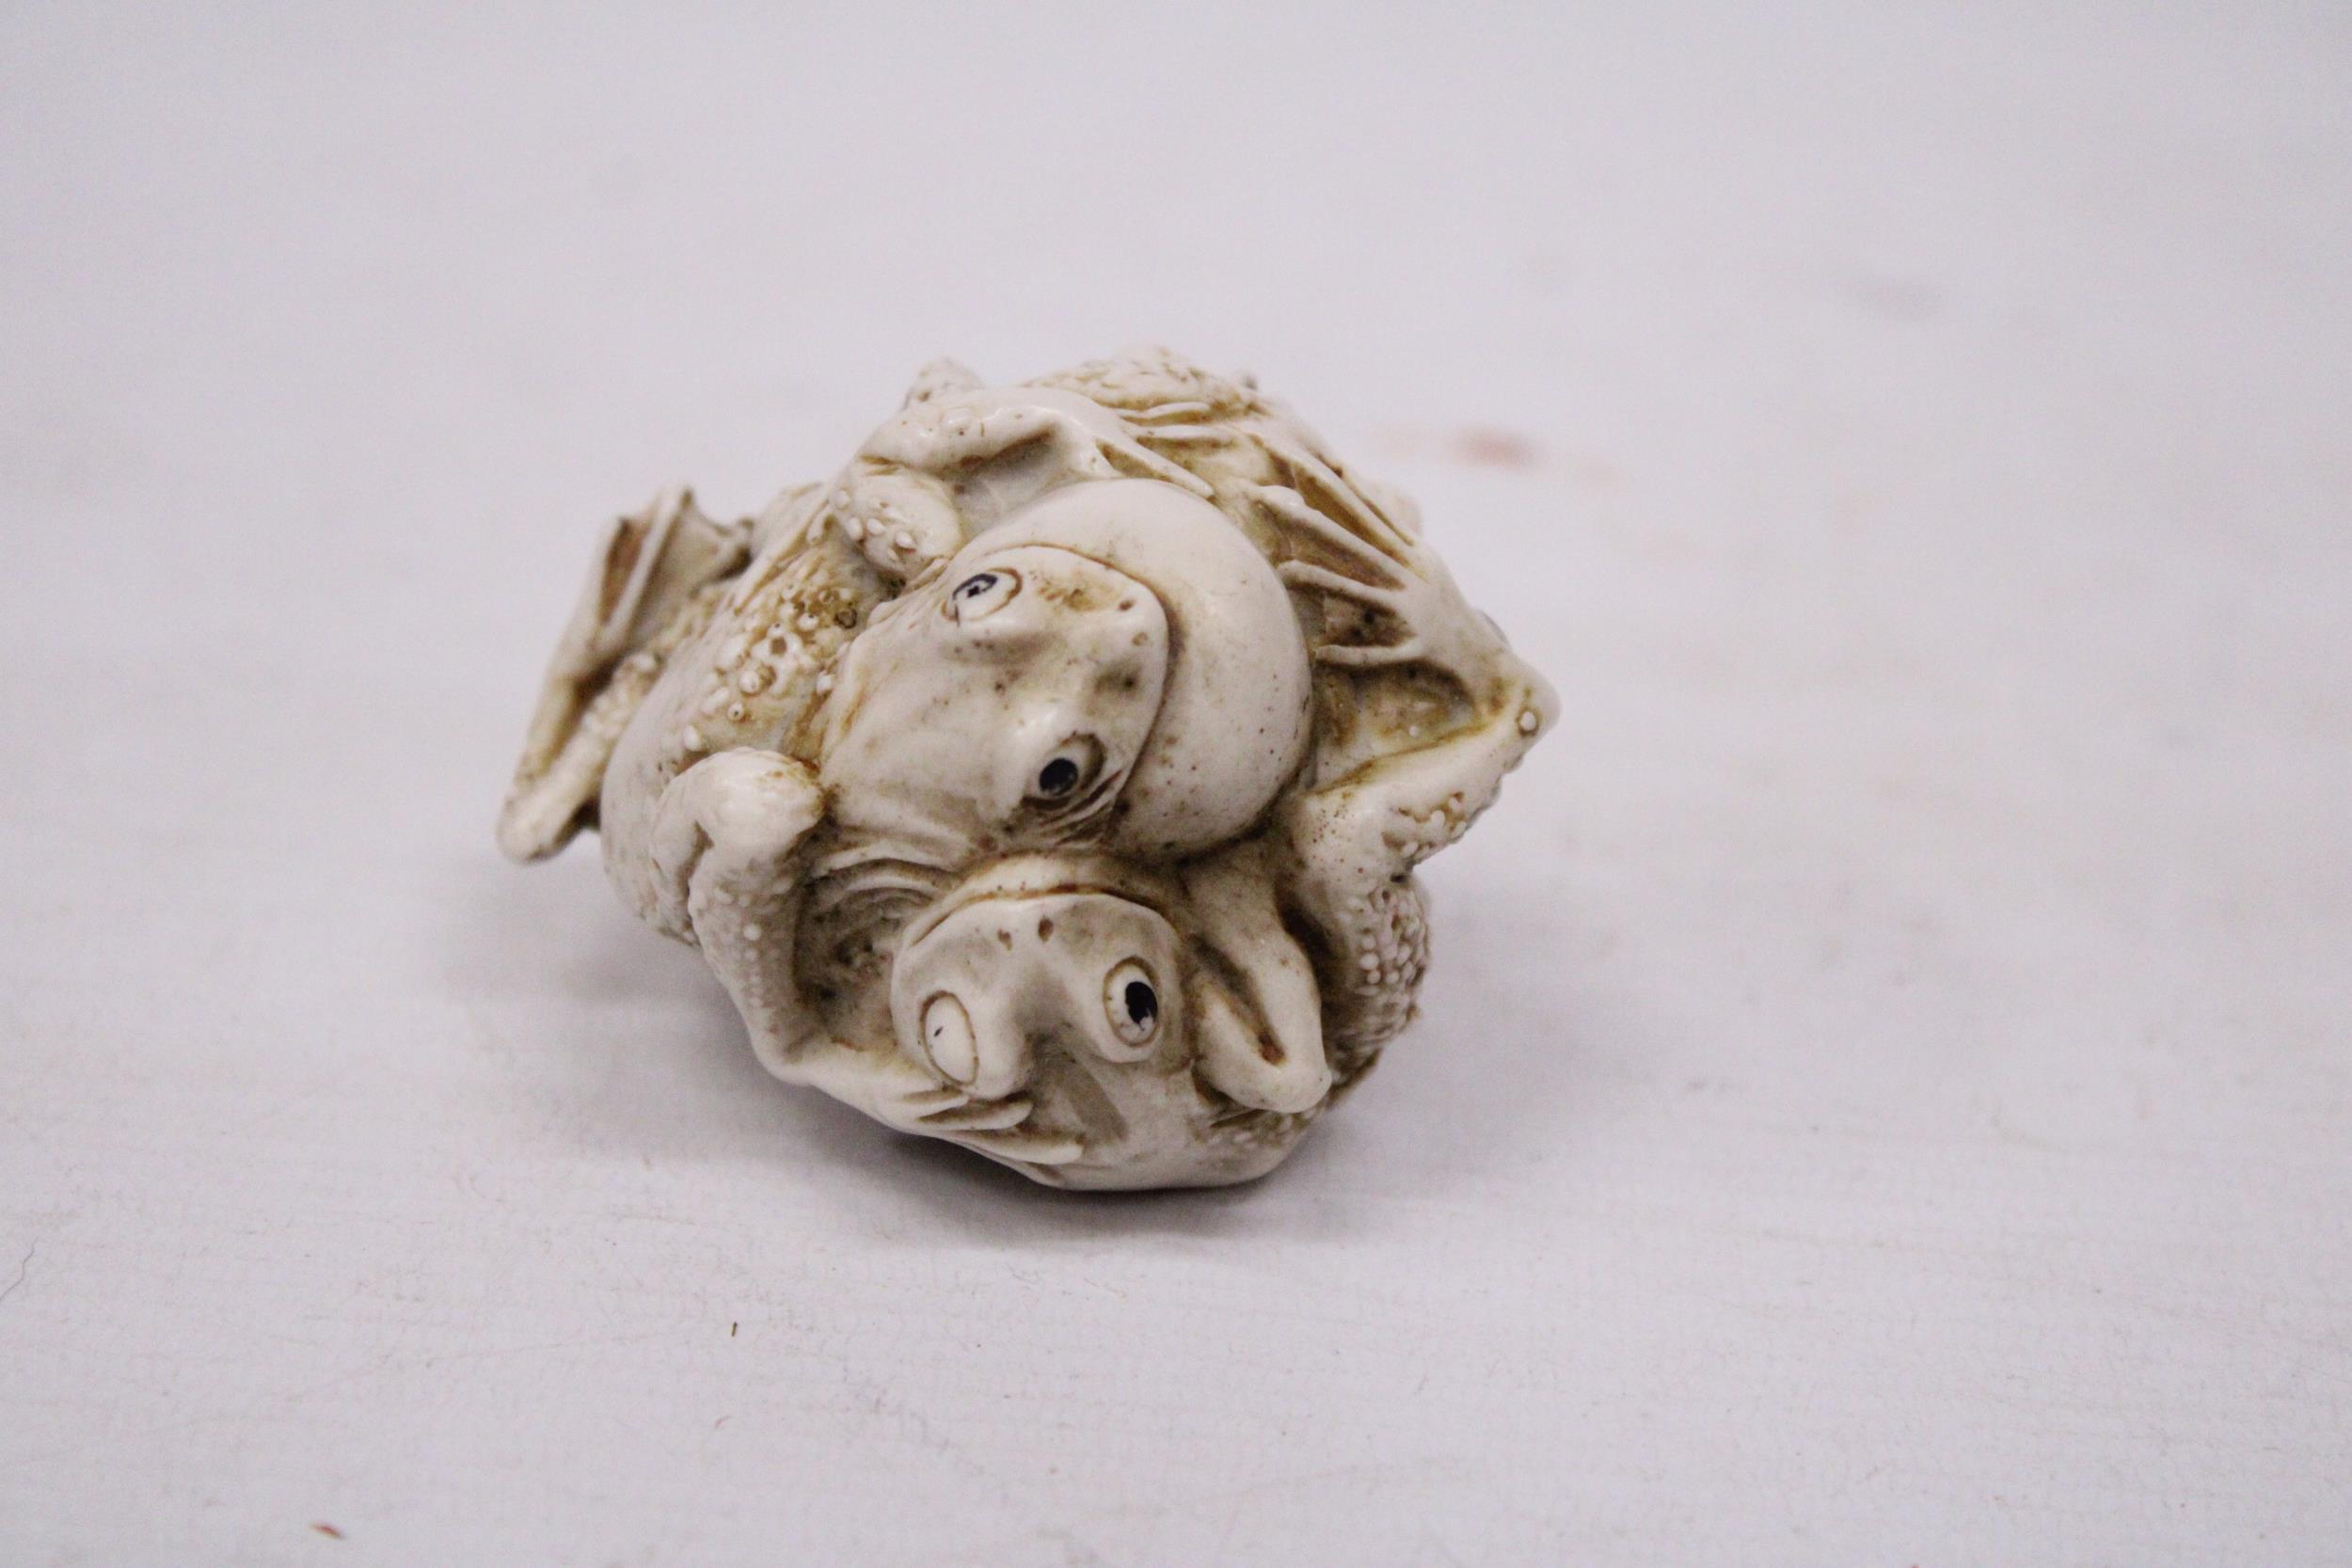 A HAND CARVED ORIENTAL FROG ORNAMENT - Image 6 of 6